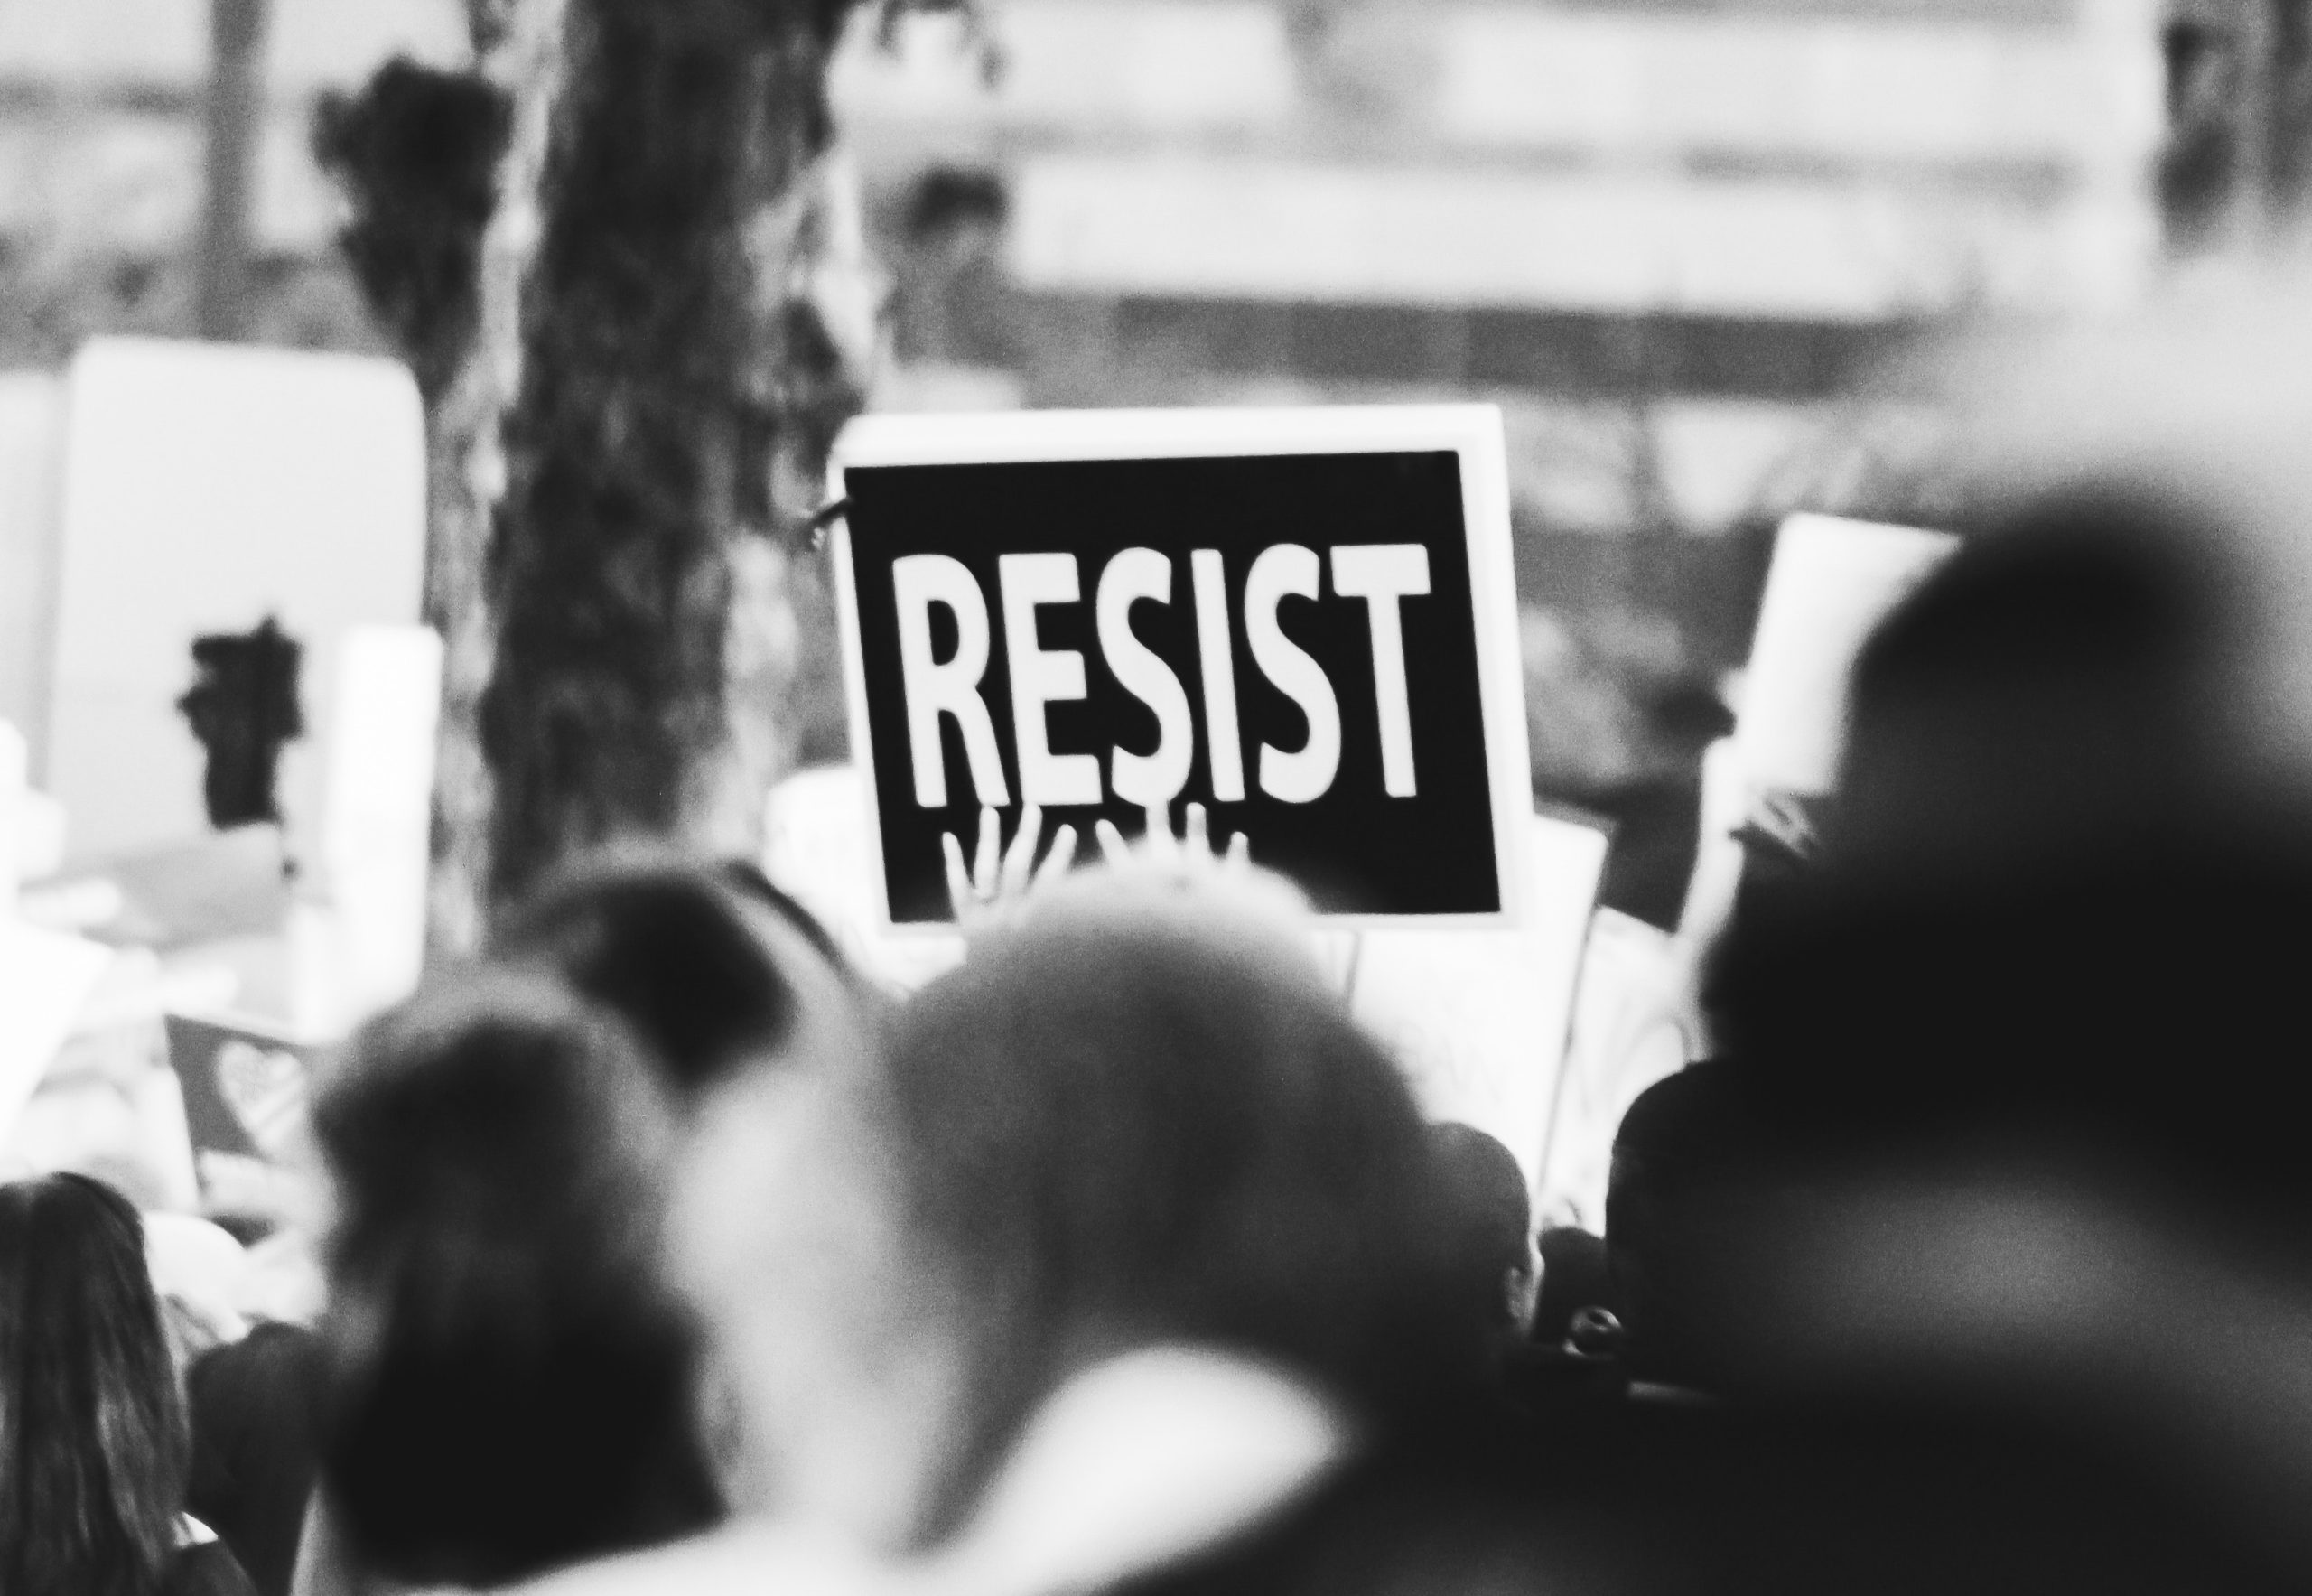 Photo of protest sign that says "Resist"